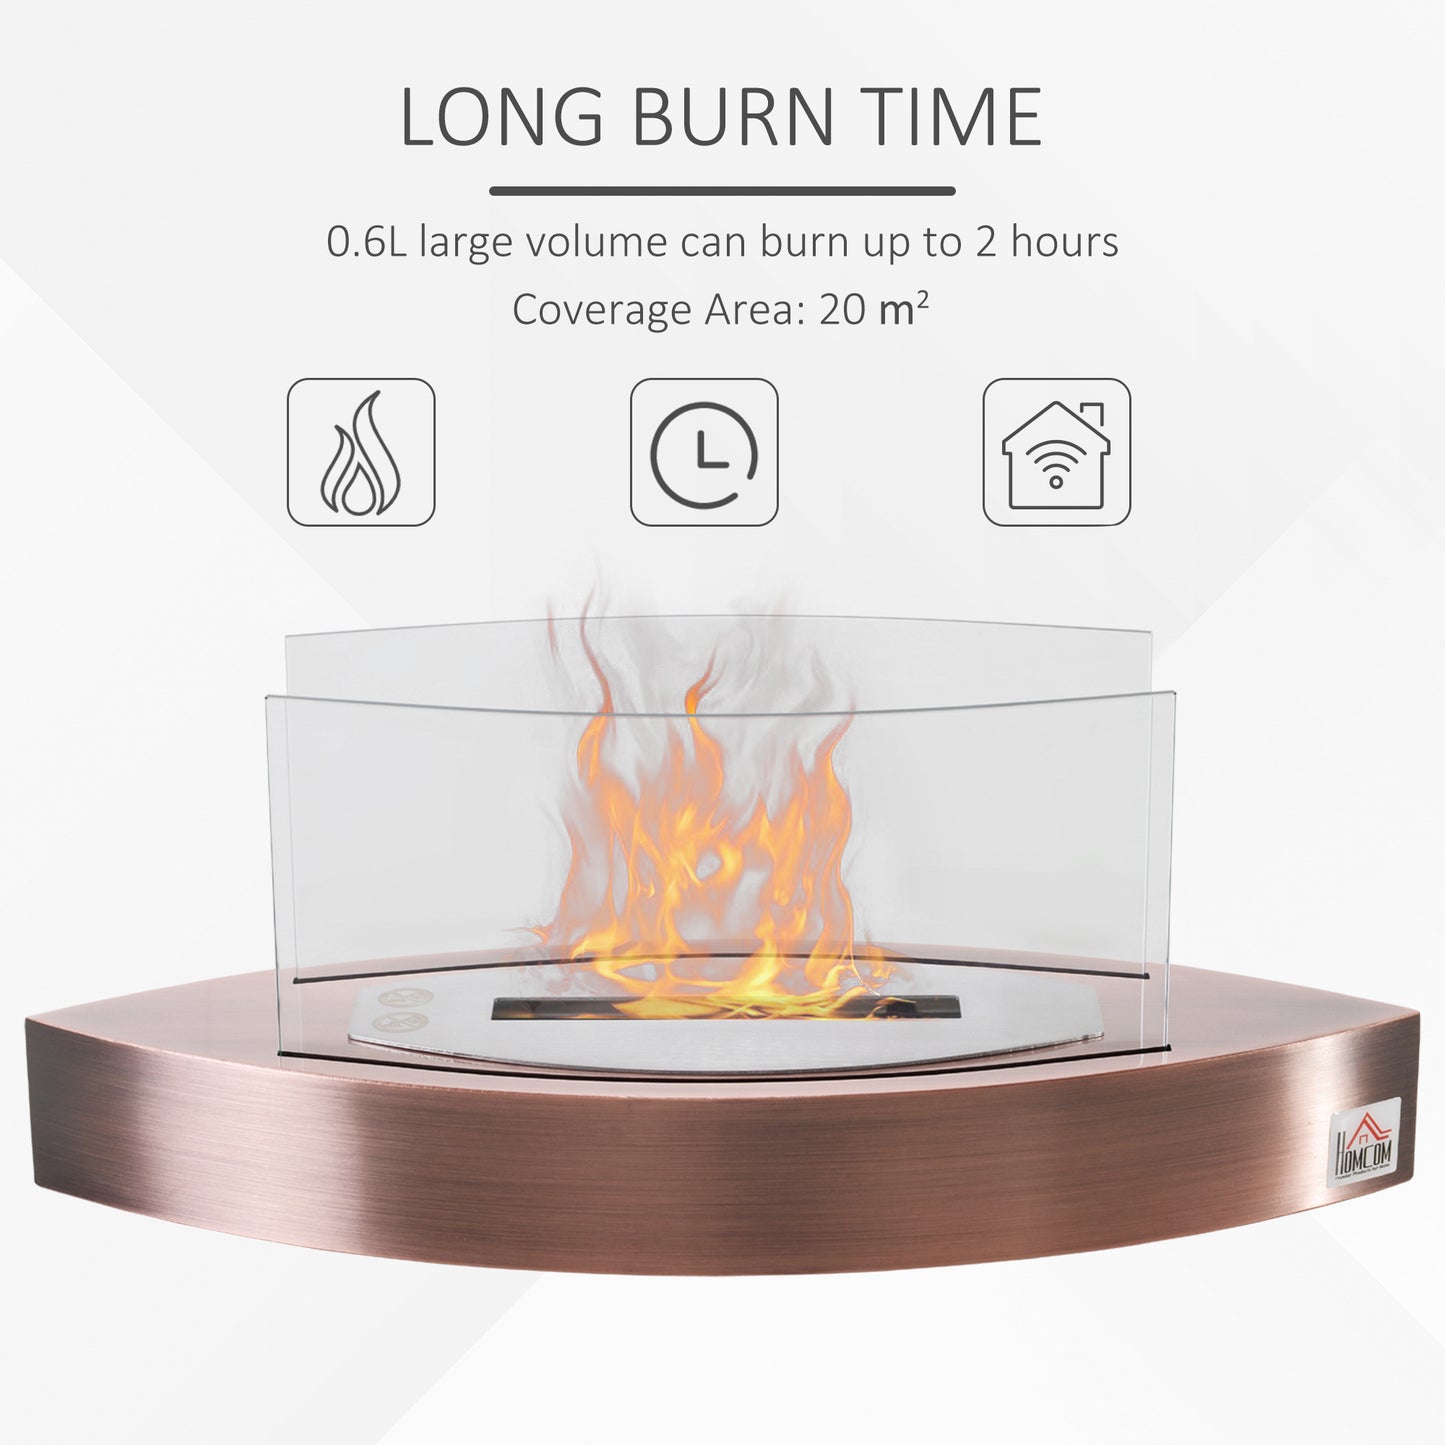 Tabletop Ethanol Fireplace with Clean-Burning Bioethanol Fuel